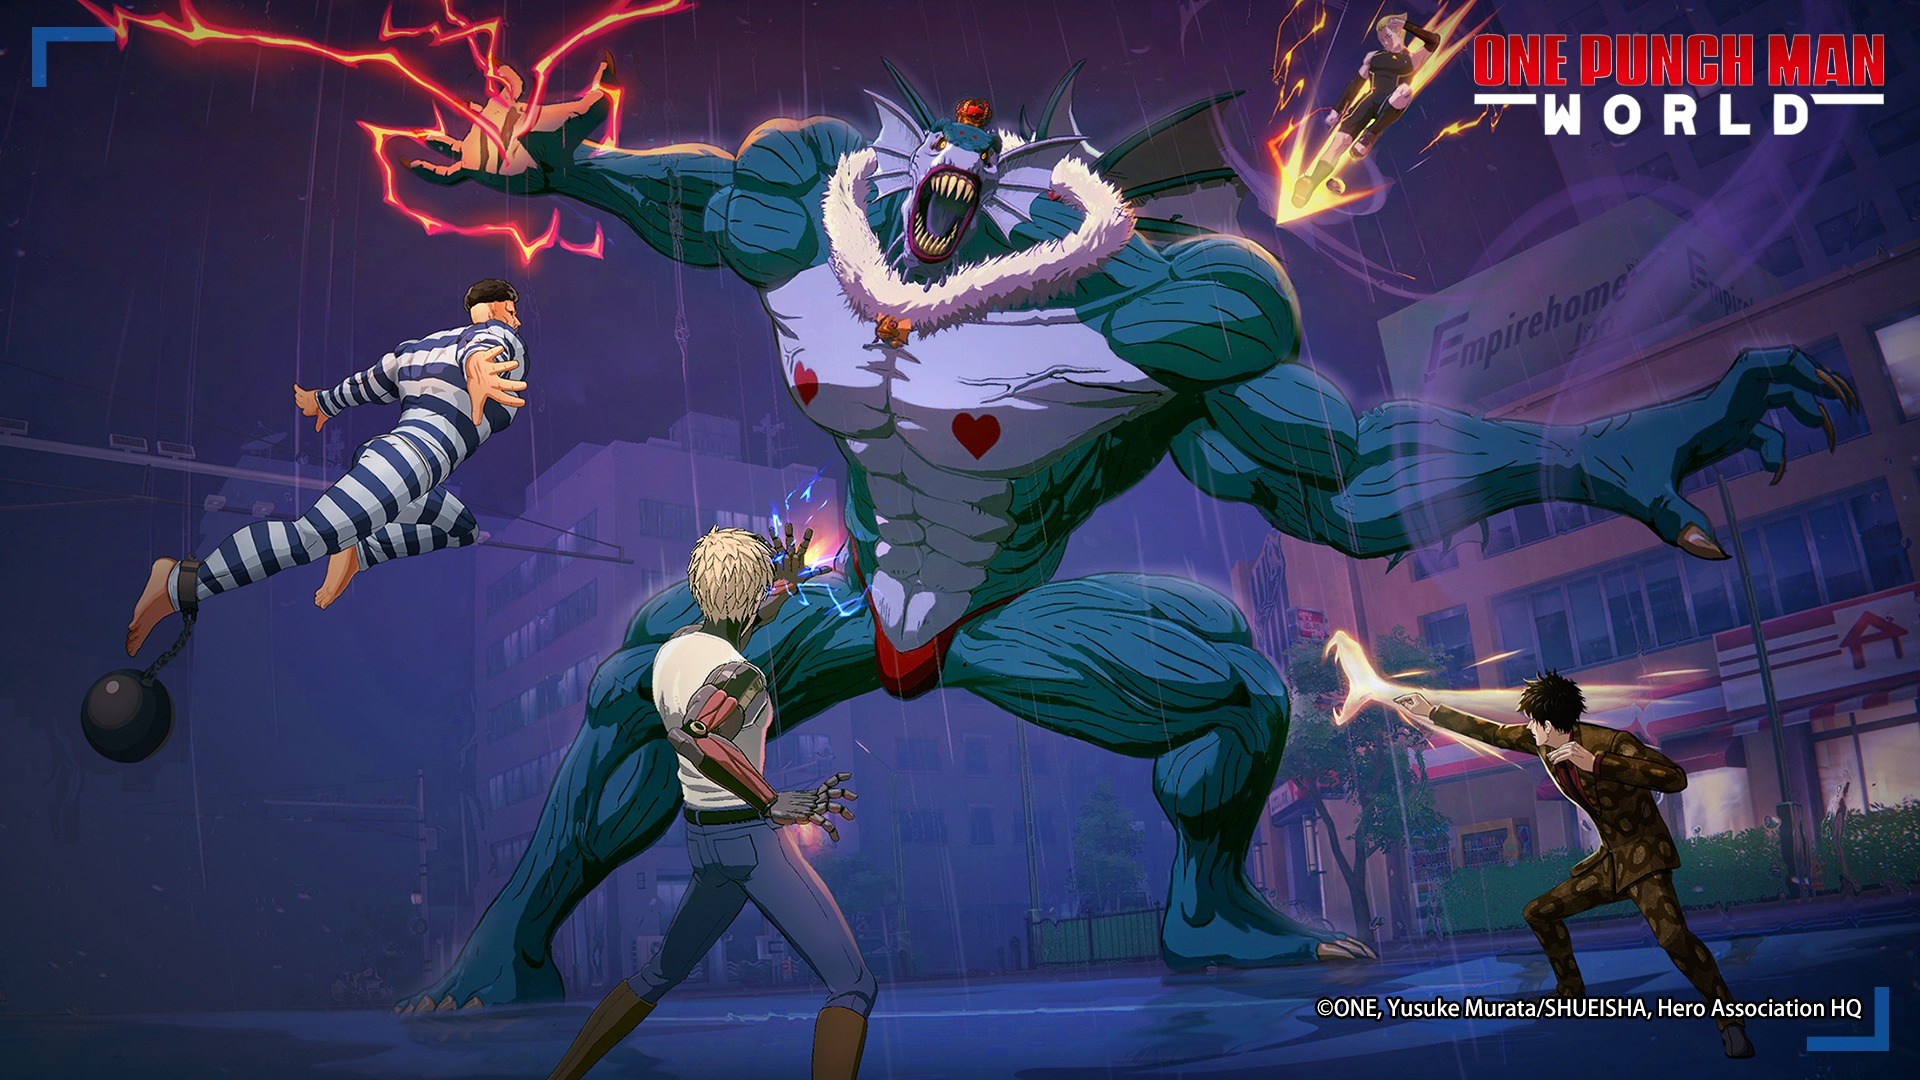 How to Play ONE PUNCH MAN: WORLD on PC or Mac with BlueStacks